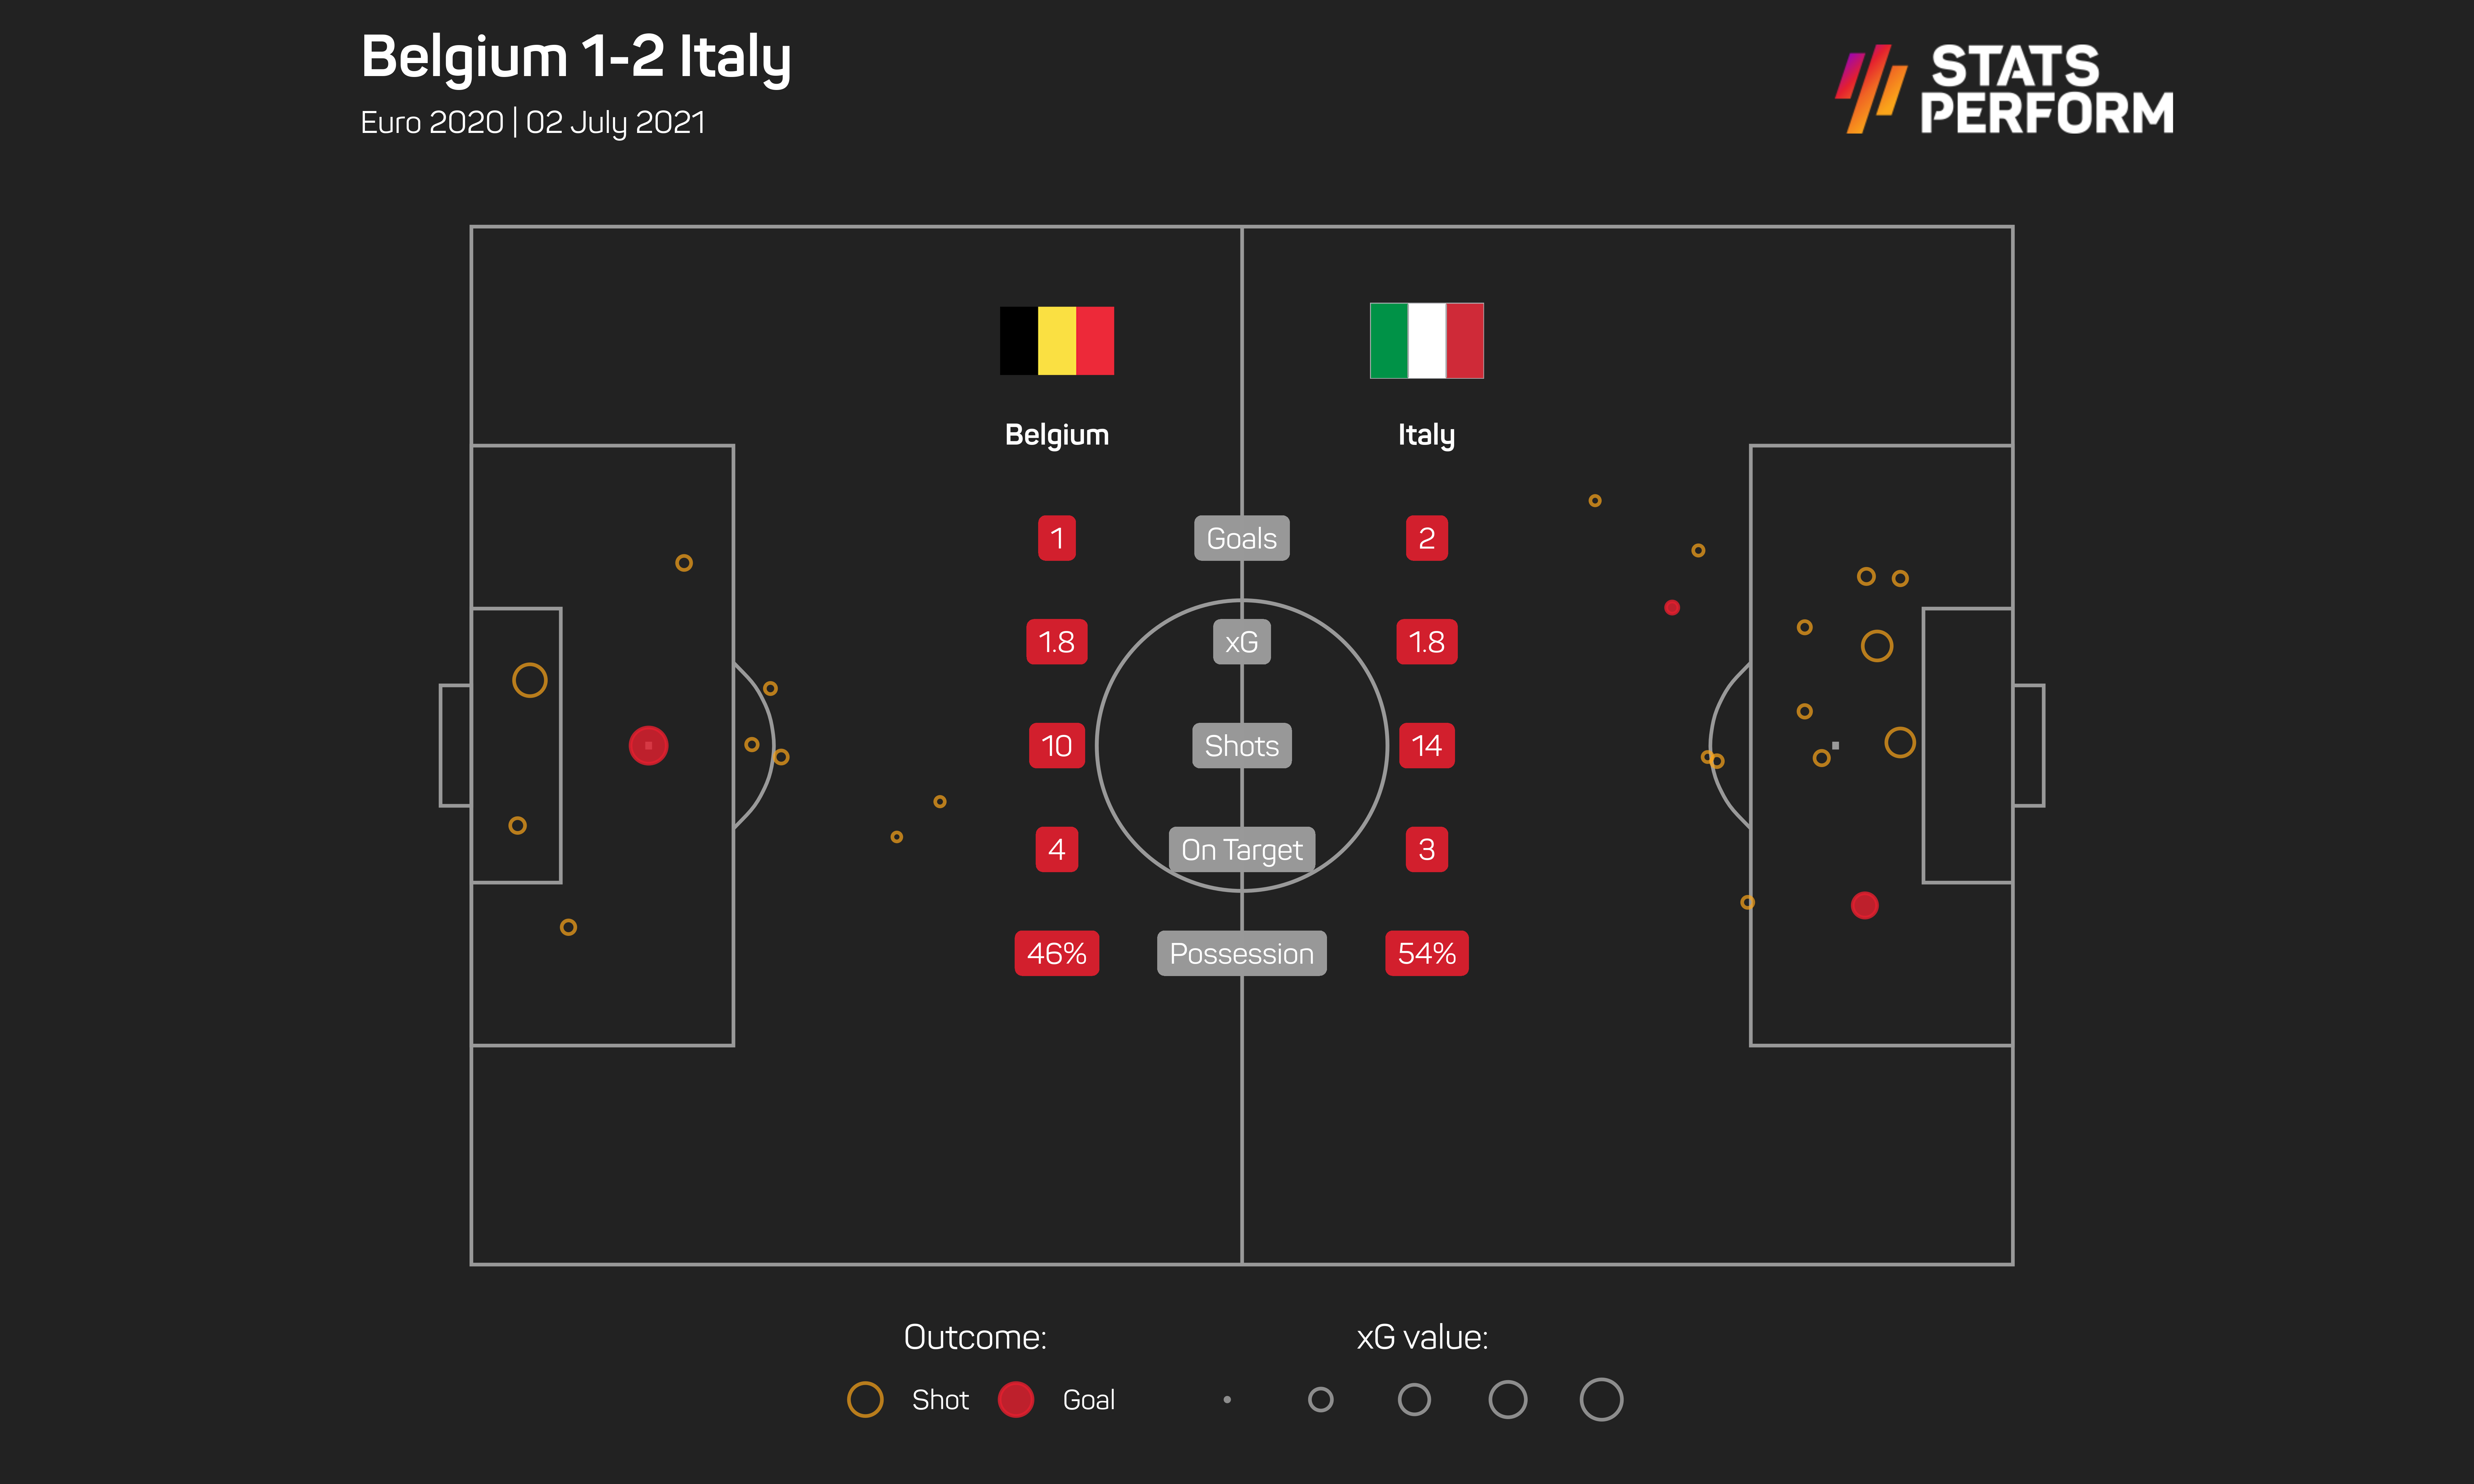 Belgium matched Italy's xG but were arguably fortunate to get their penalty